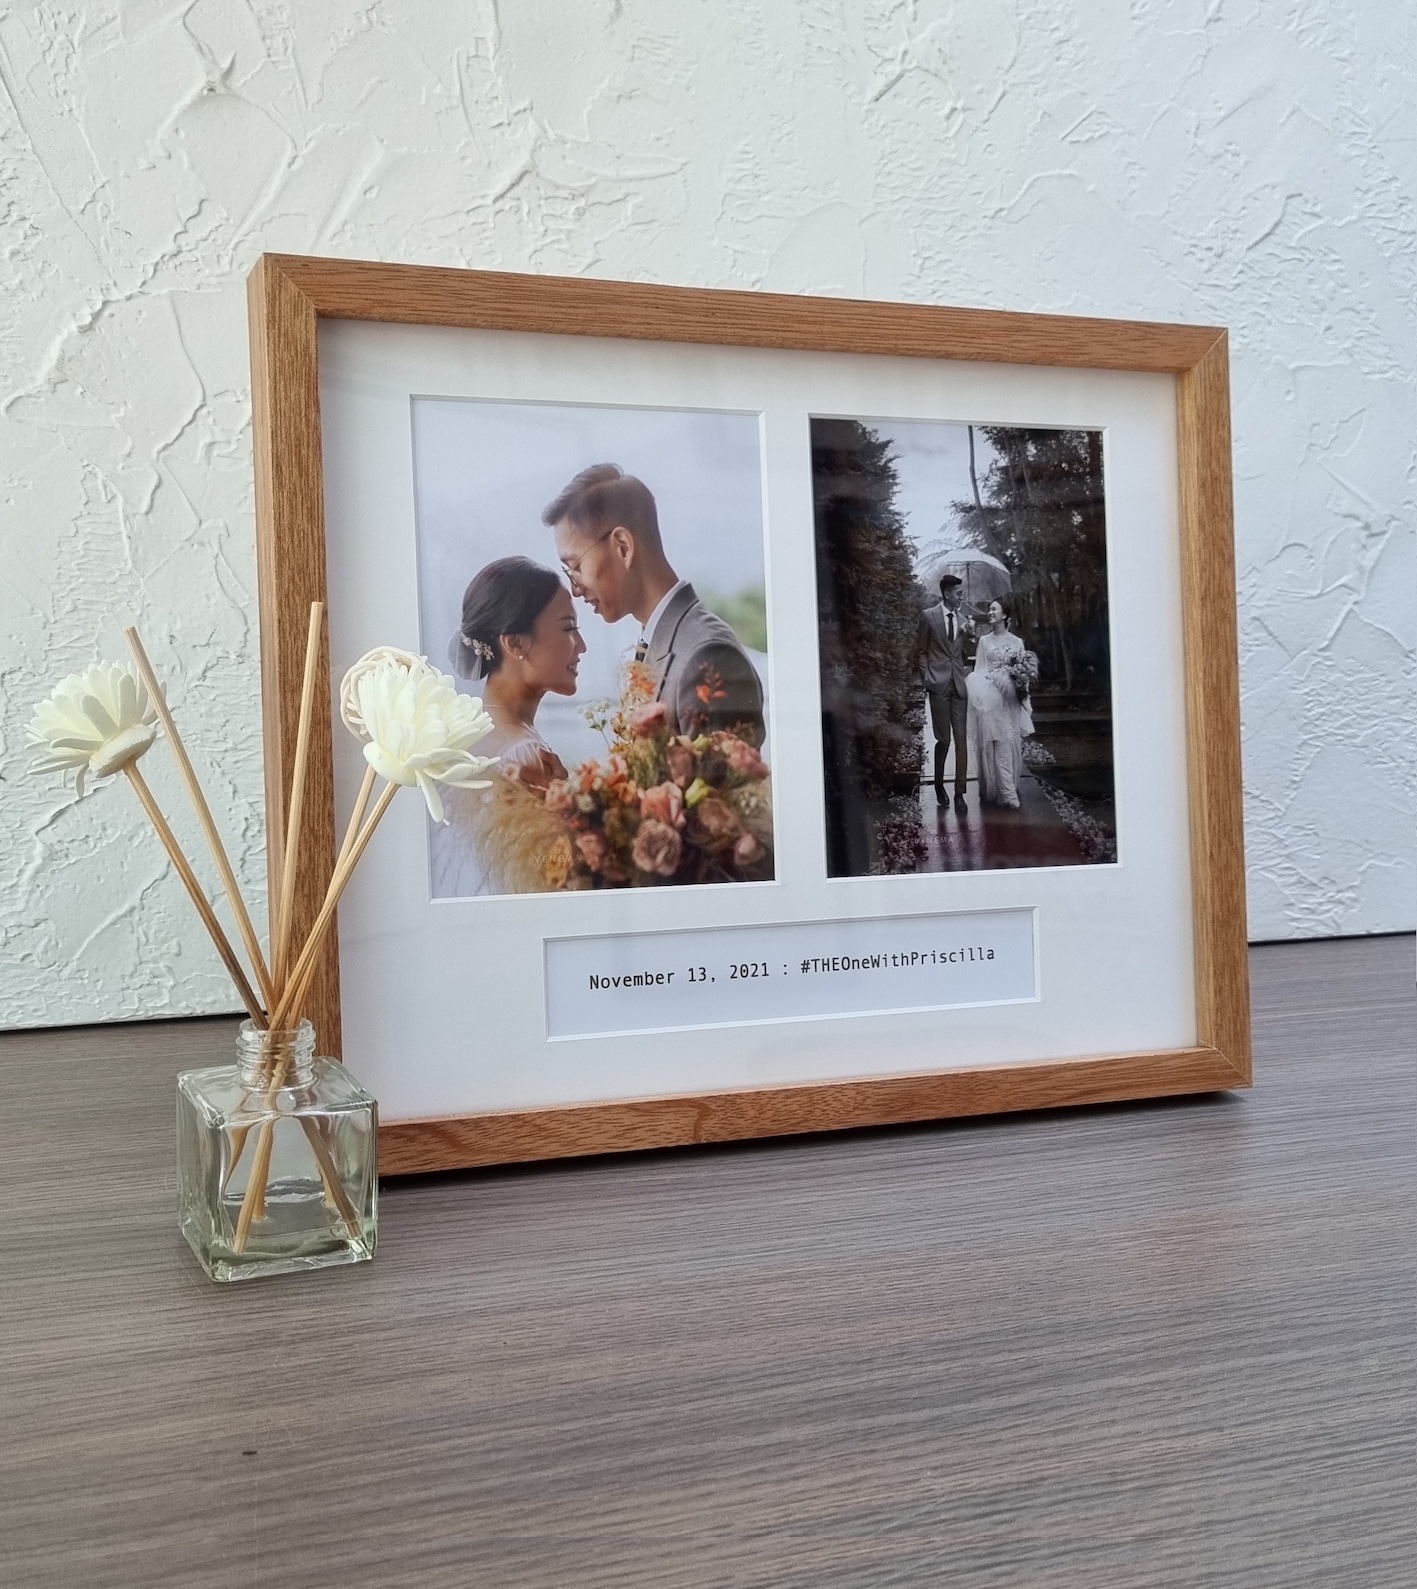 Custom Framing for Special Occasions: How to Create Personalized Gifts for Weddings, Graduations, and Other Celebrations